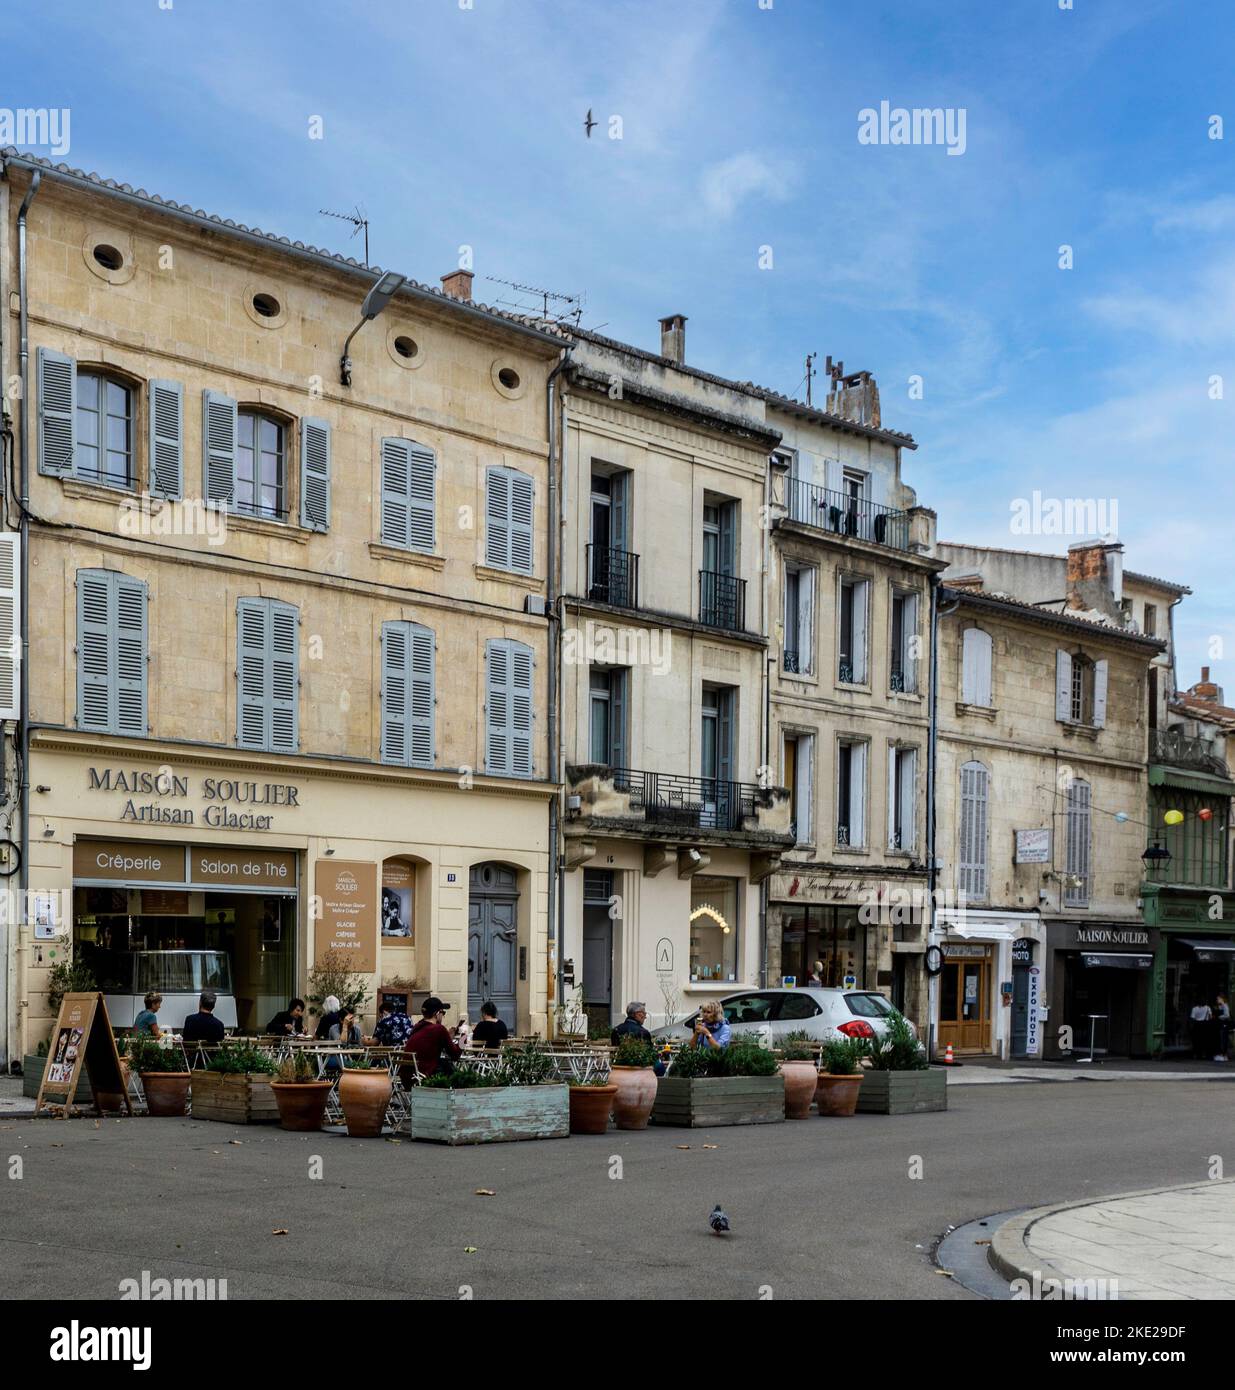 People eating outside Maison Soulier, Artisan Glacier in Arles France. Stock Photo